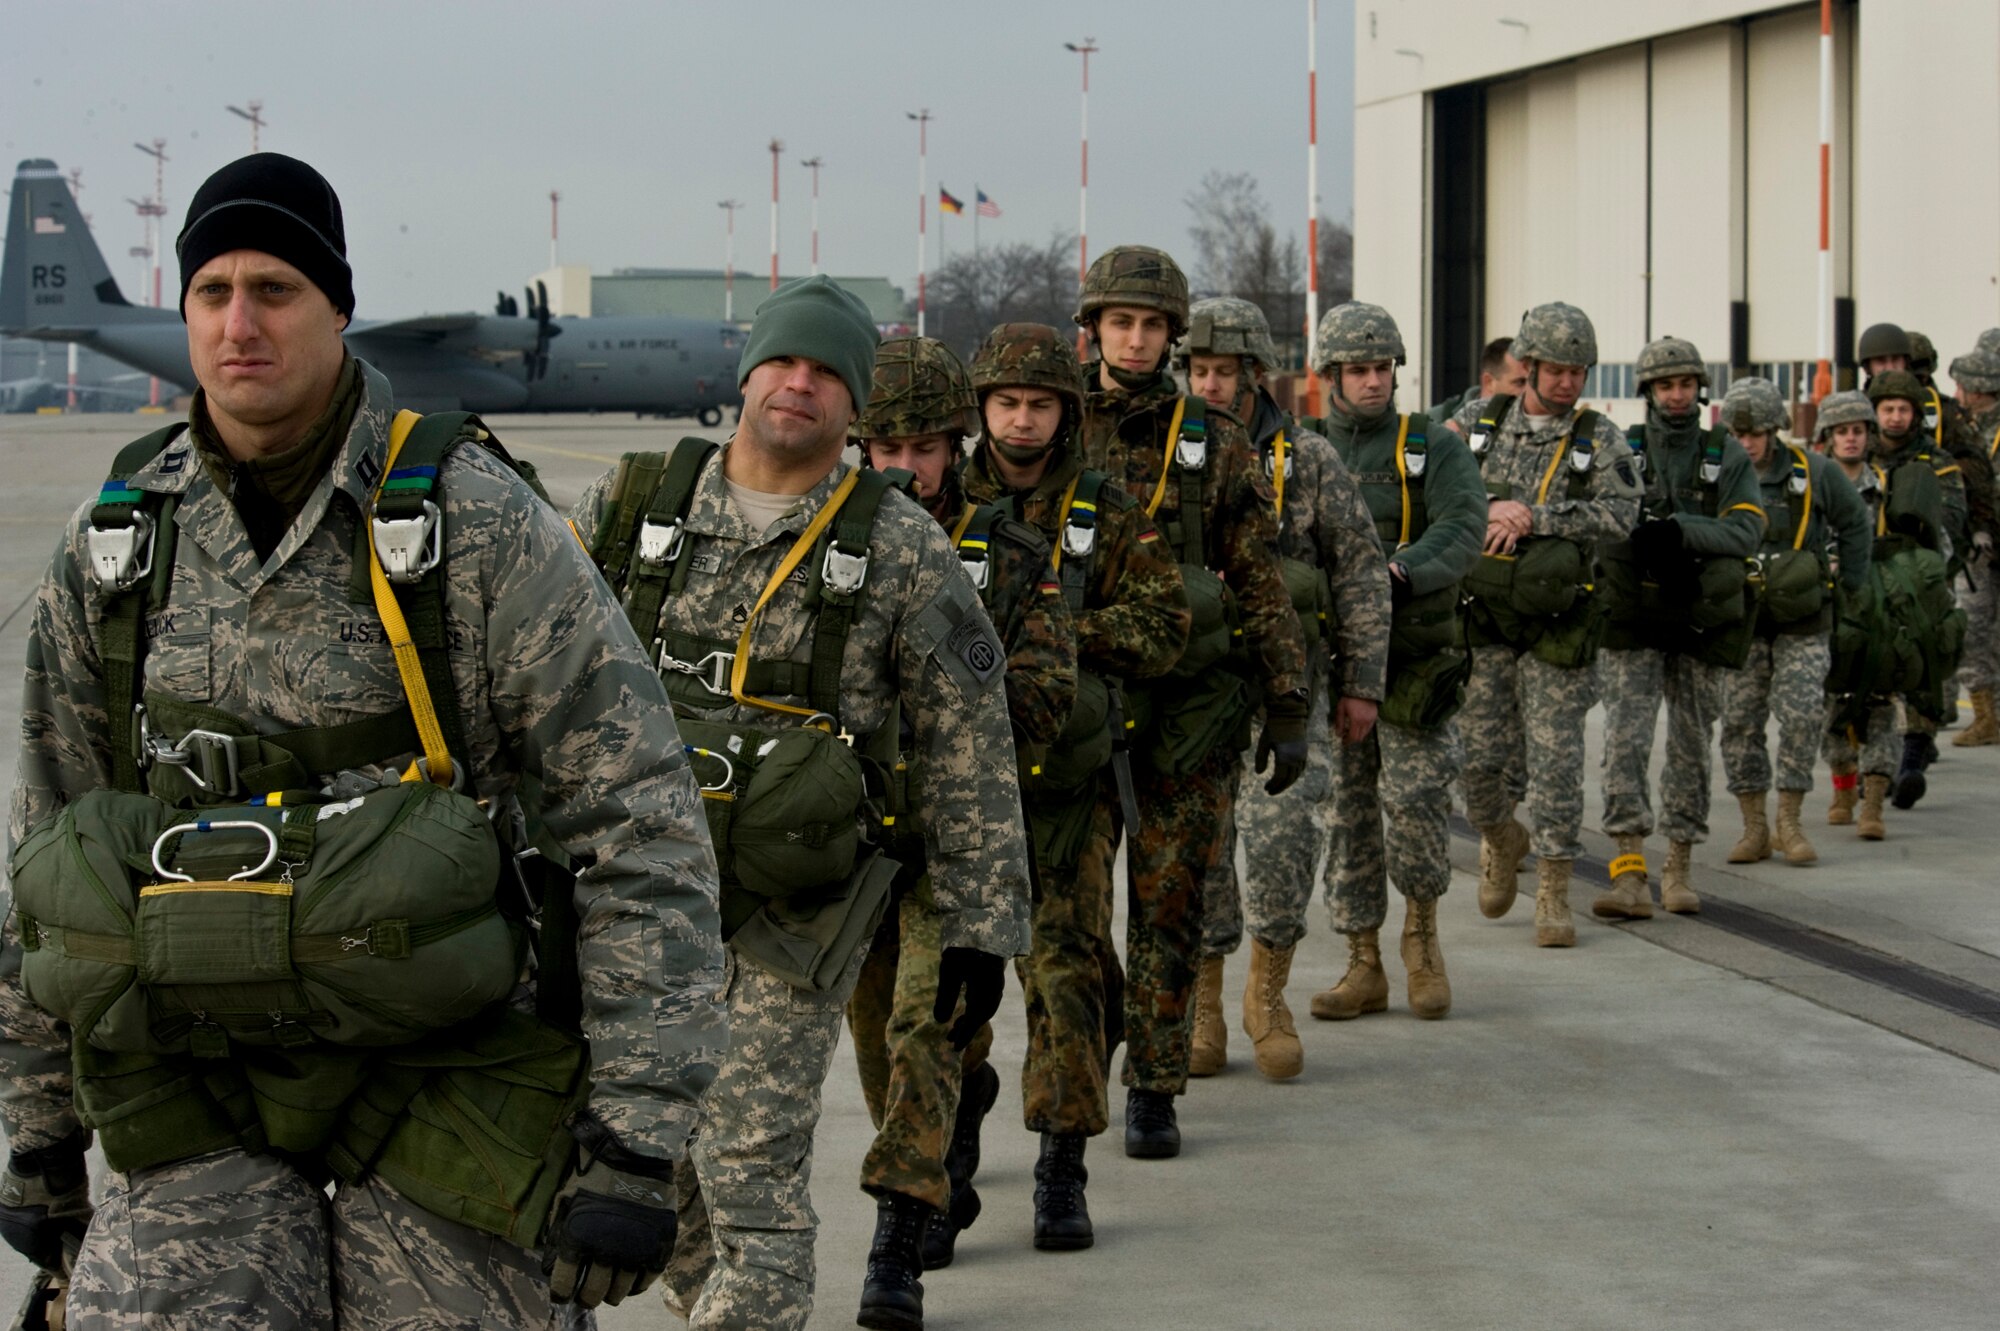 U.S. Army Soldiers, Air Force Airmen and German soldiers load into a C-130J Hercules, from Ramstein Air Base, Germany, in preparation for a training airdrop mission at the Marnheim, Germany drop zone, Feb. 10, 2011. The single C-130J aircraft from the 37th Airlift Squadron, 86th Airlift Wing will drop more than fifty service members at the drop site.  (U.S. Air Force photo/TSgt Wayne Clark, AFNE Regional News Bureau) (Released)